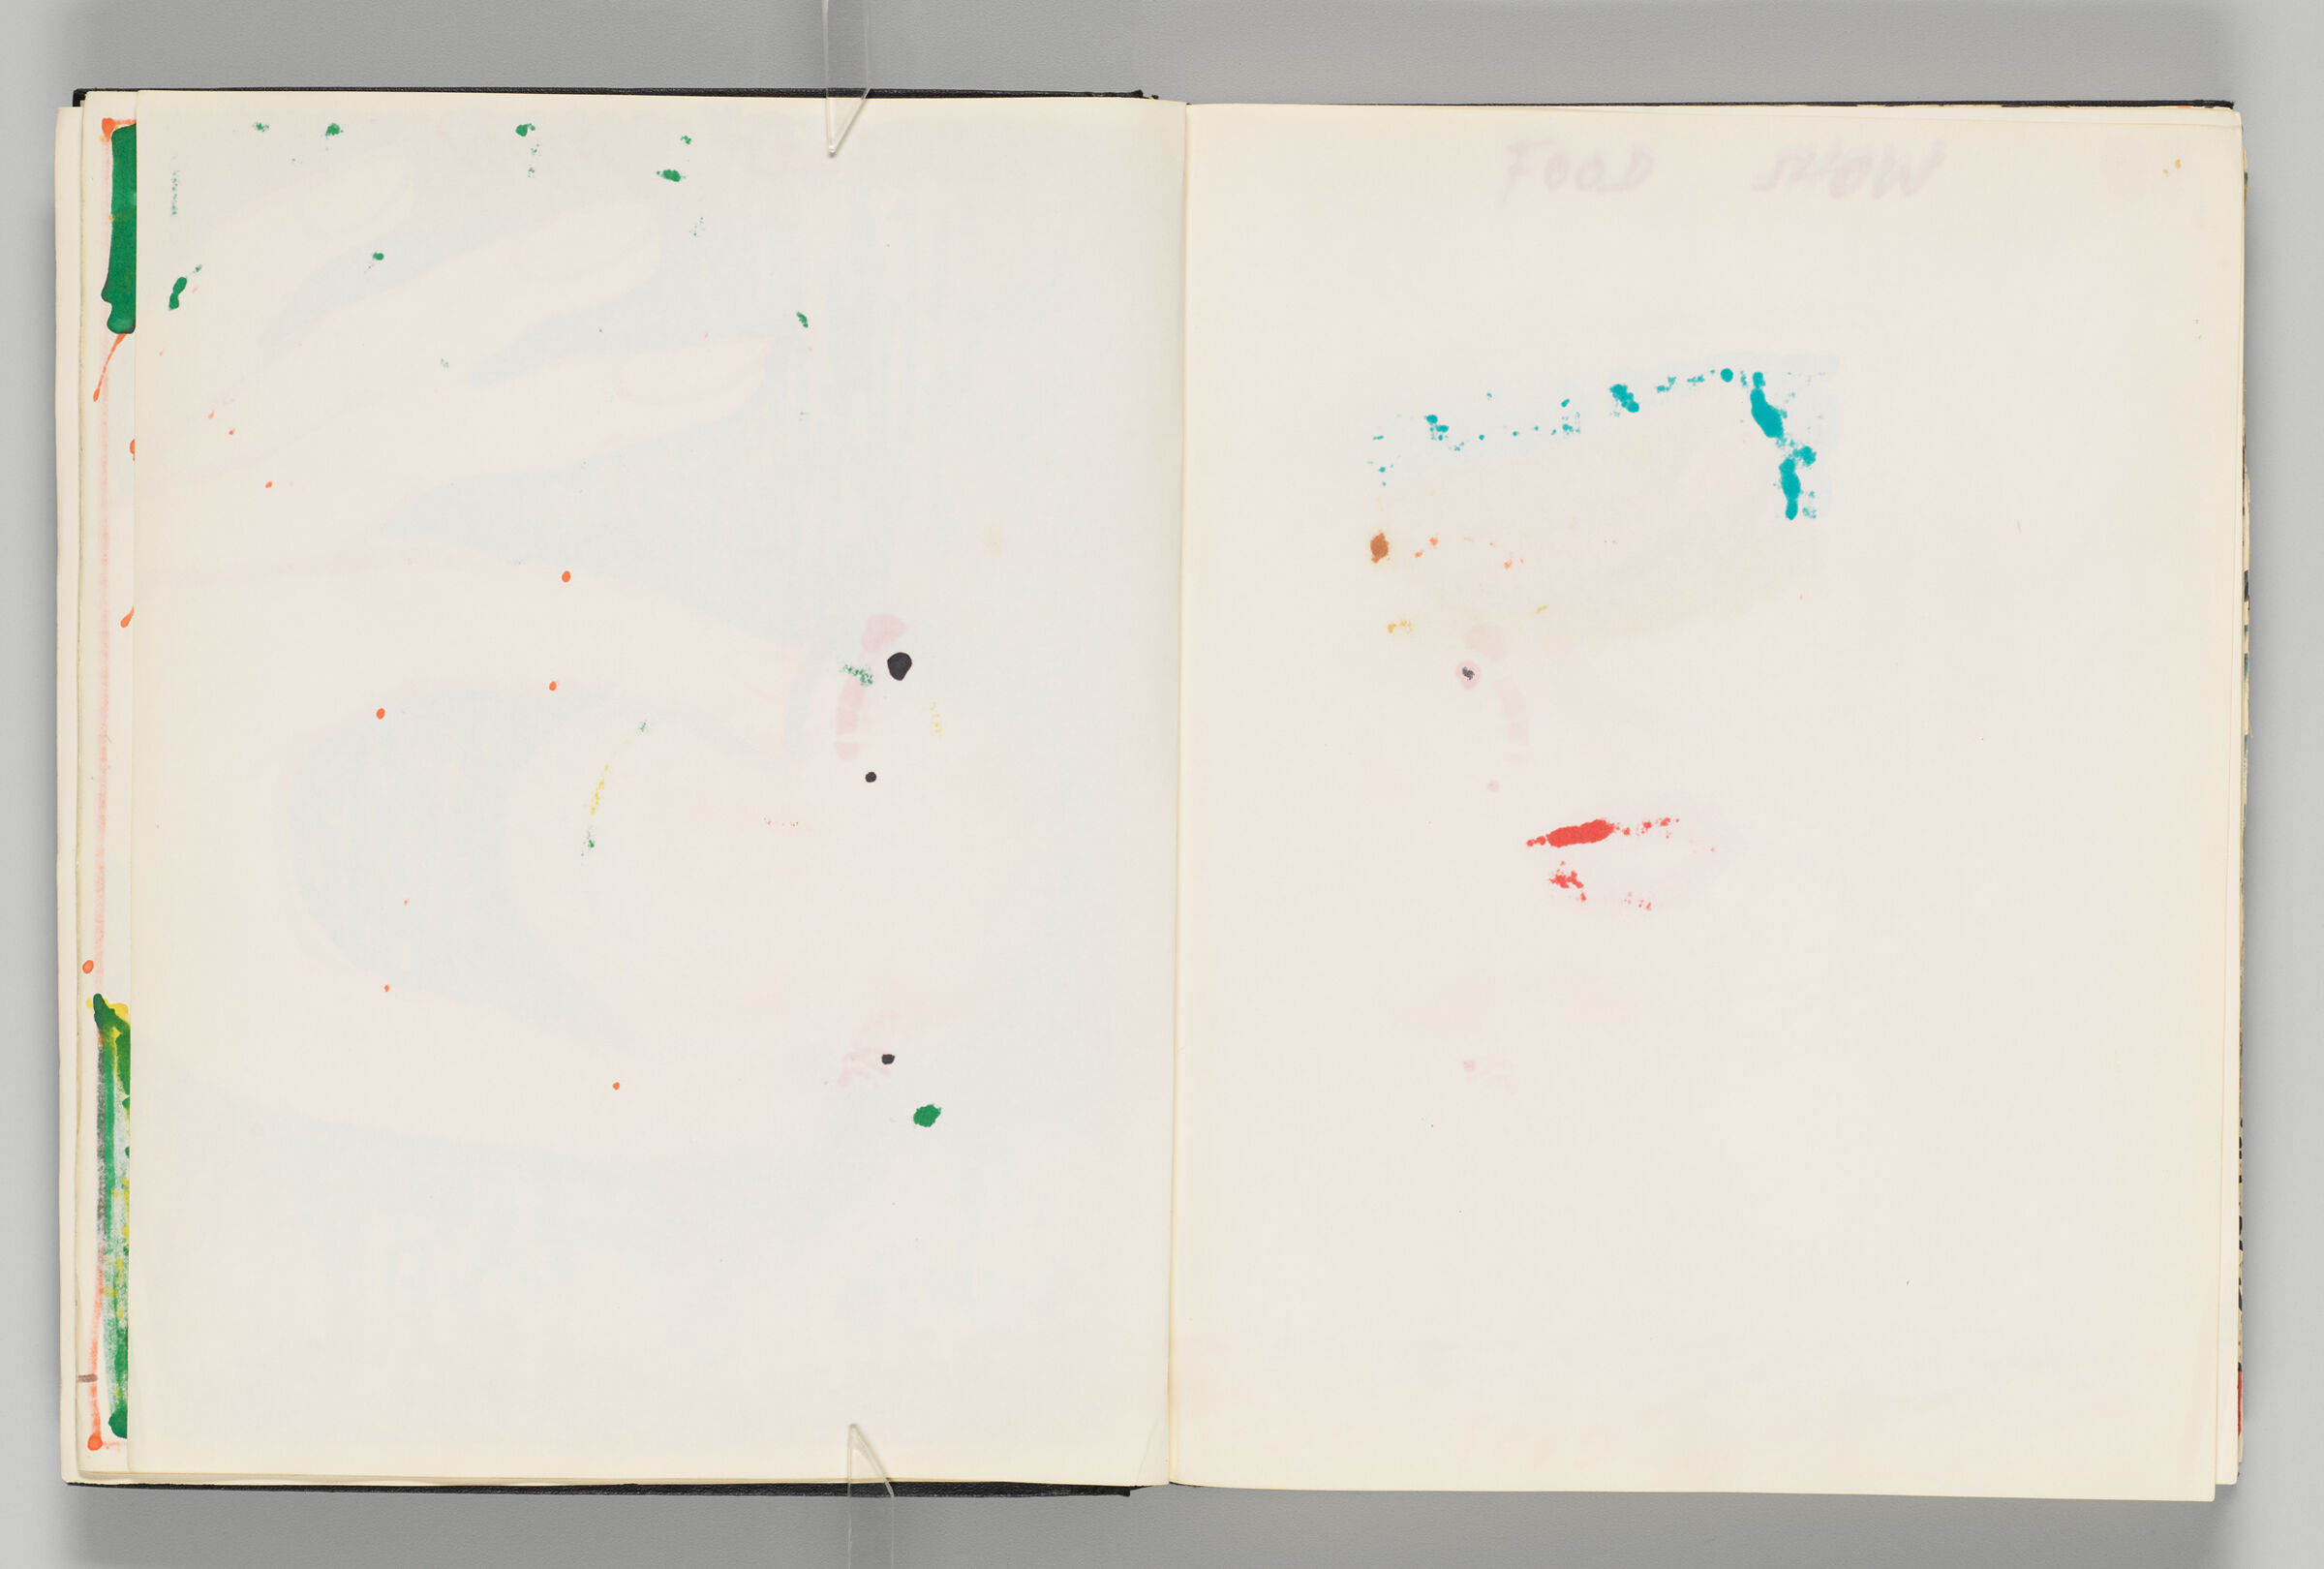 Untitled (Blank With Color Transfers, Left Page); Untitled (Blank With Color Transfers, Right Page)